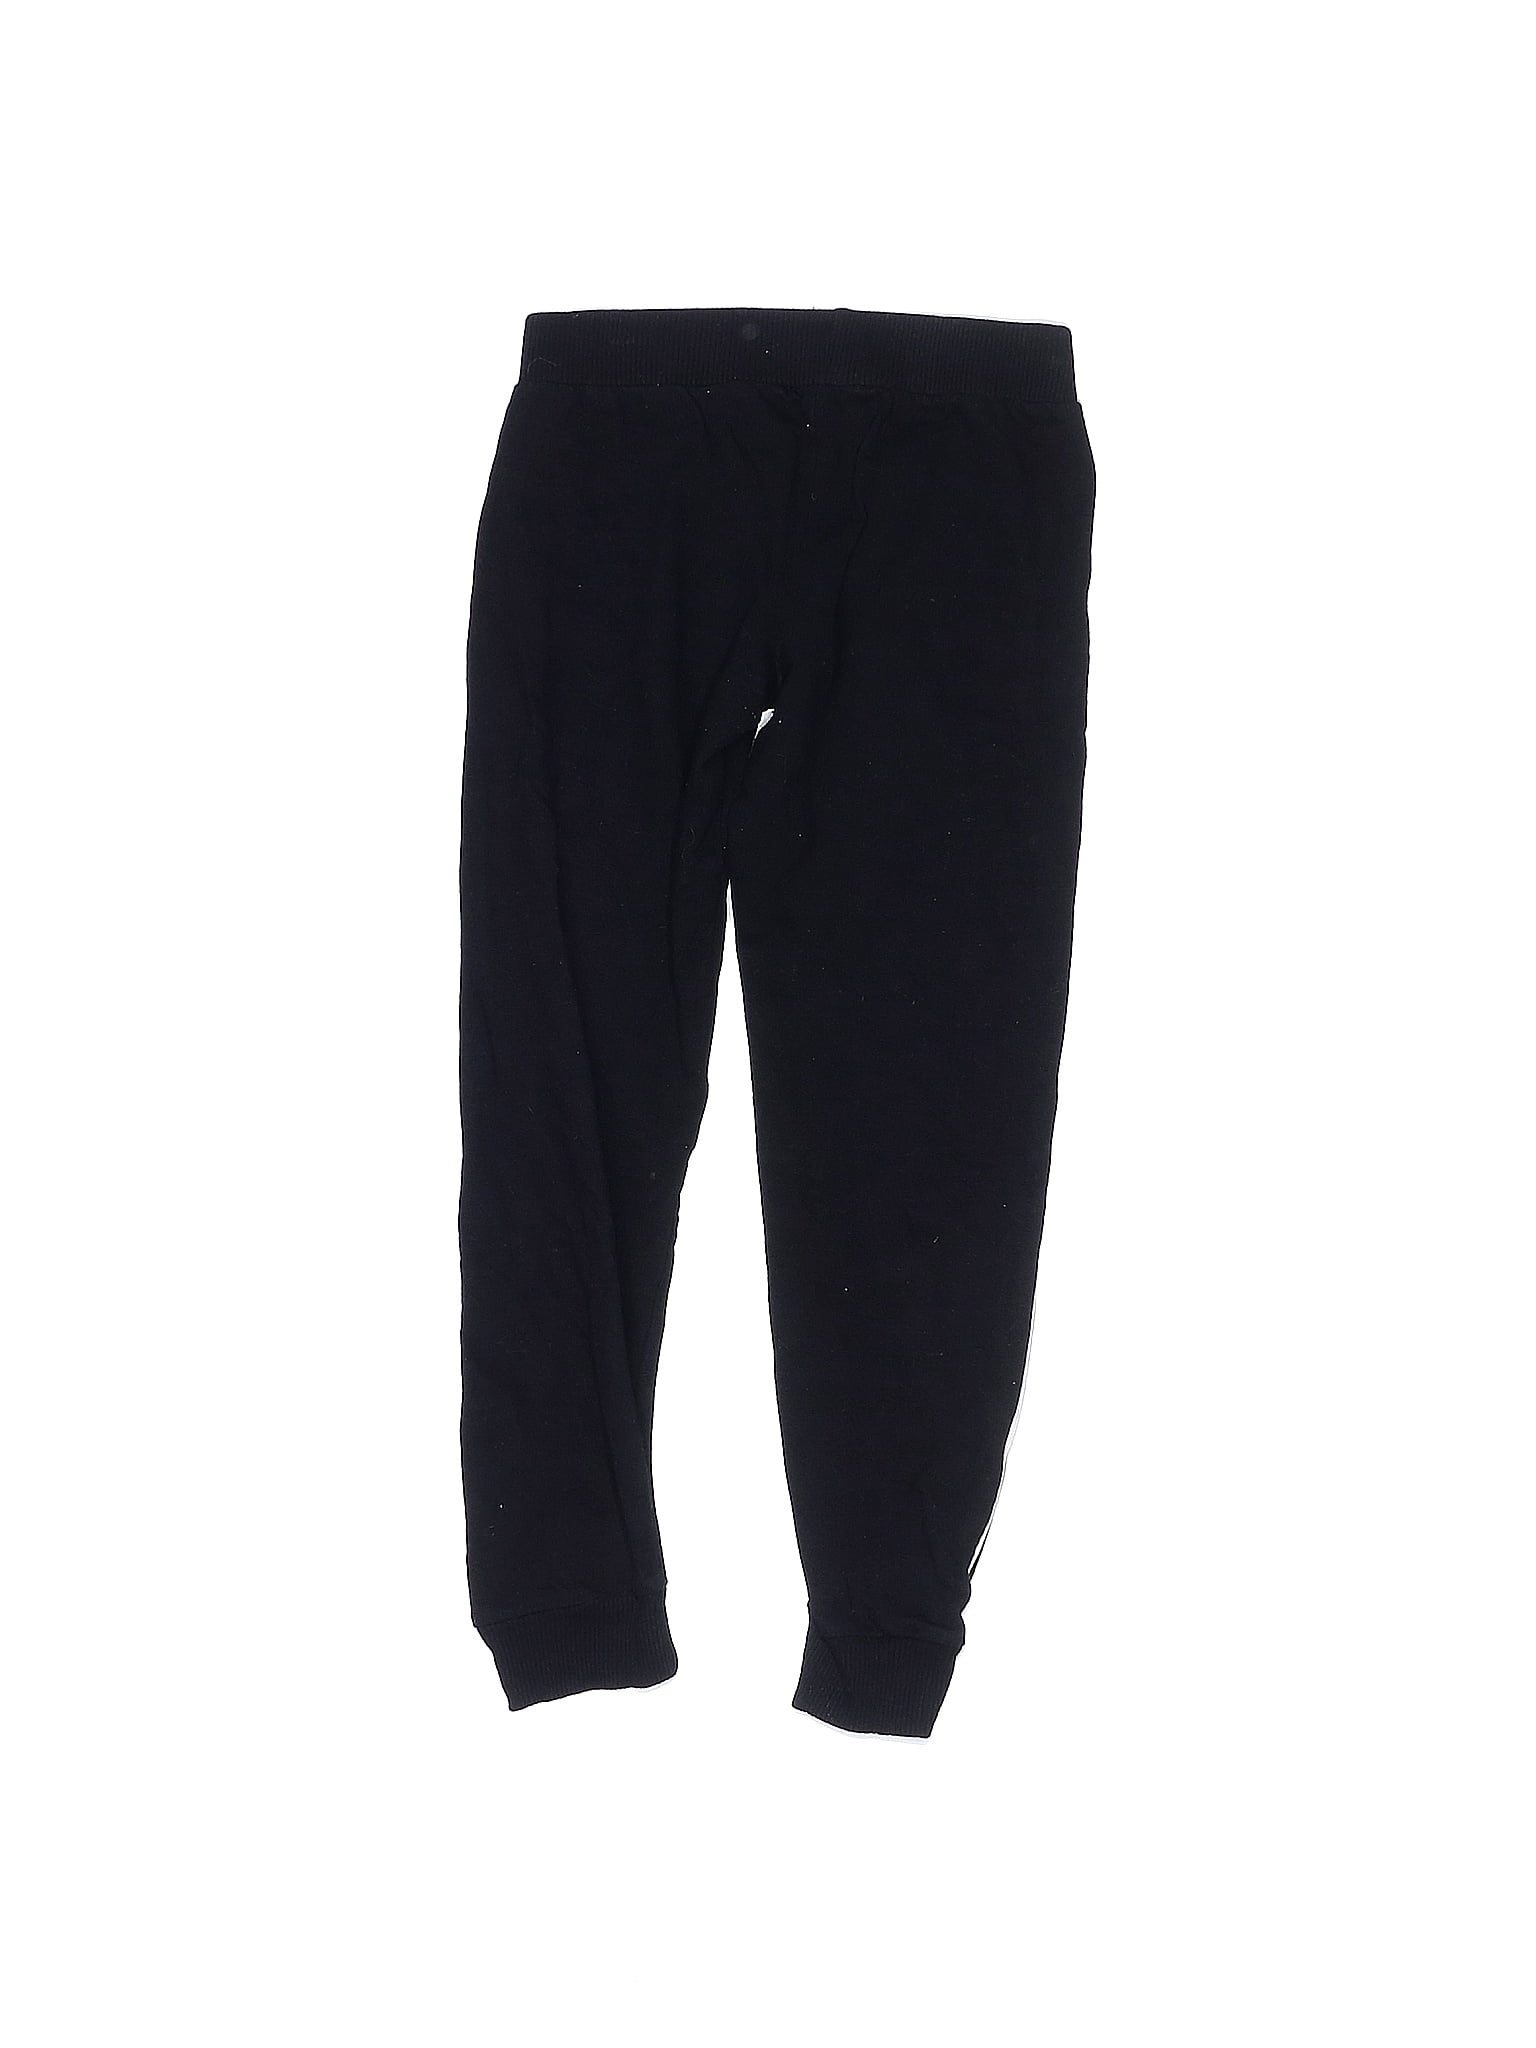 Mossimo Supply Co. Black Leggings Size M - 46% off